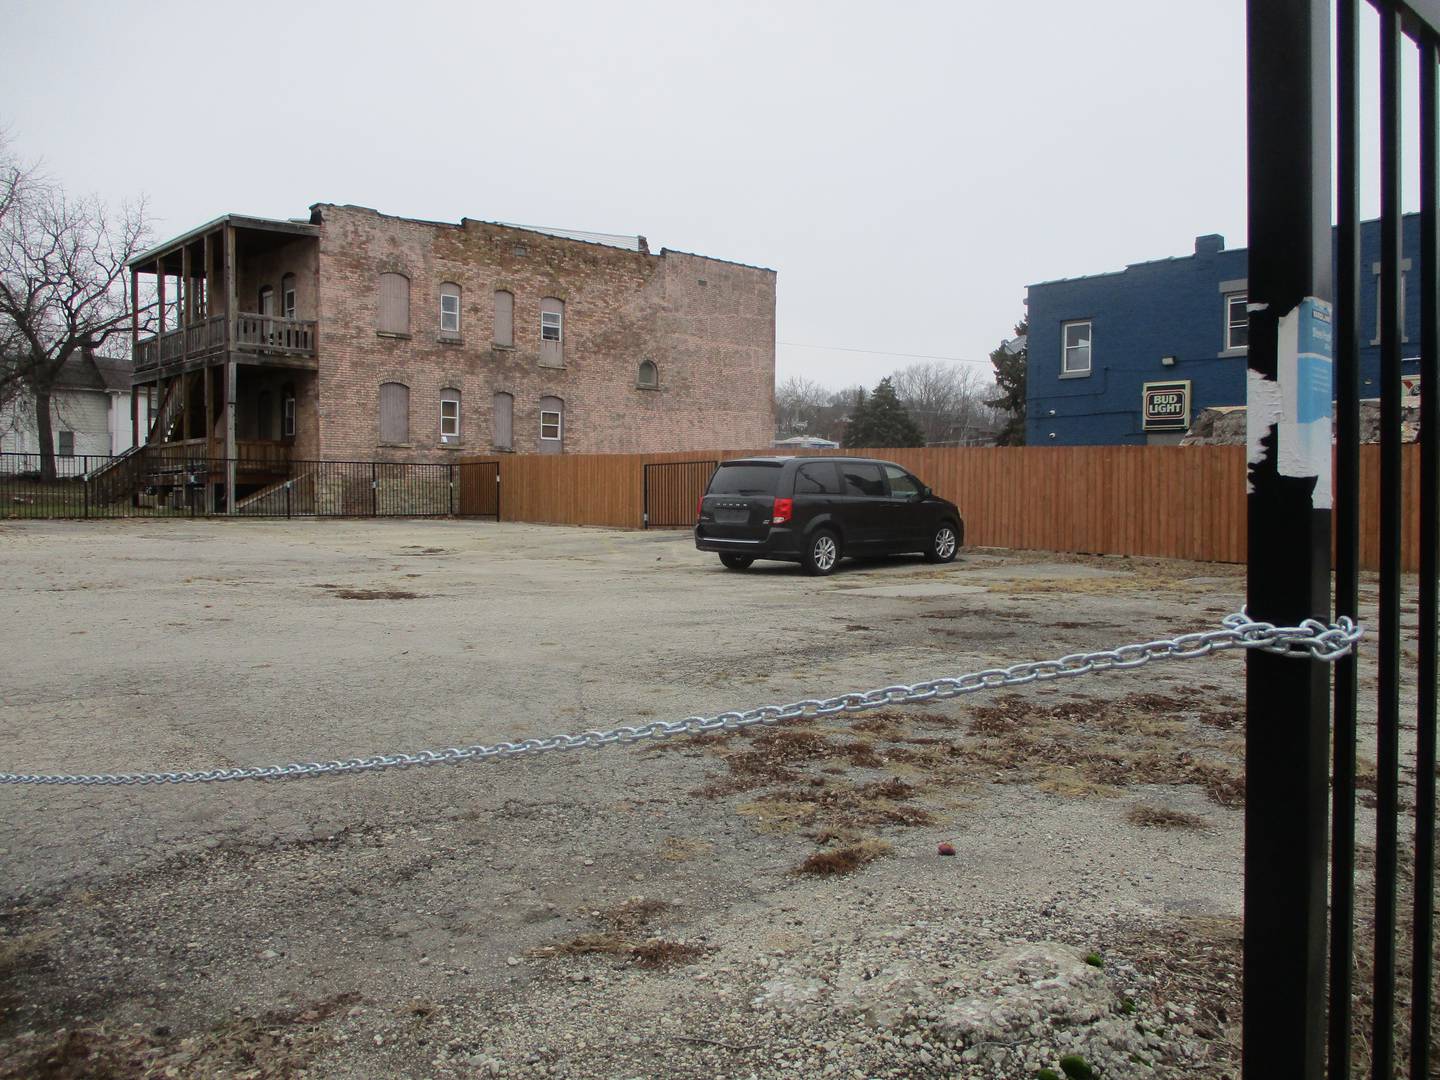 The owner of 1st Choice Auto Sales wanted to use this lot at 115 N. Center St. to store inventory but was rejected by the city. Jan. 21, 2023.